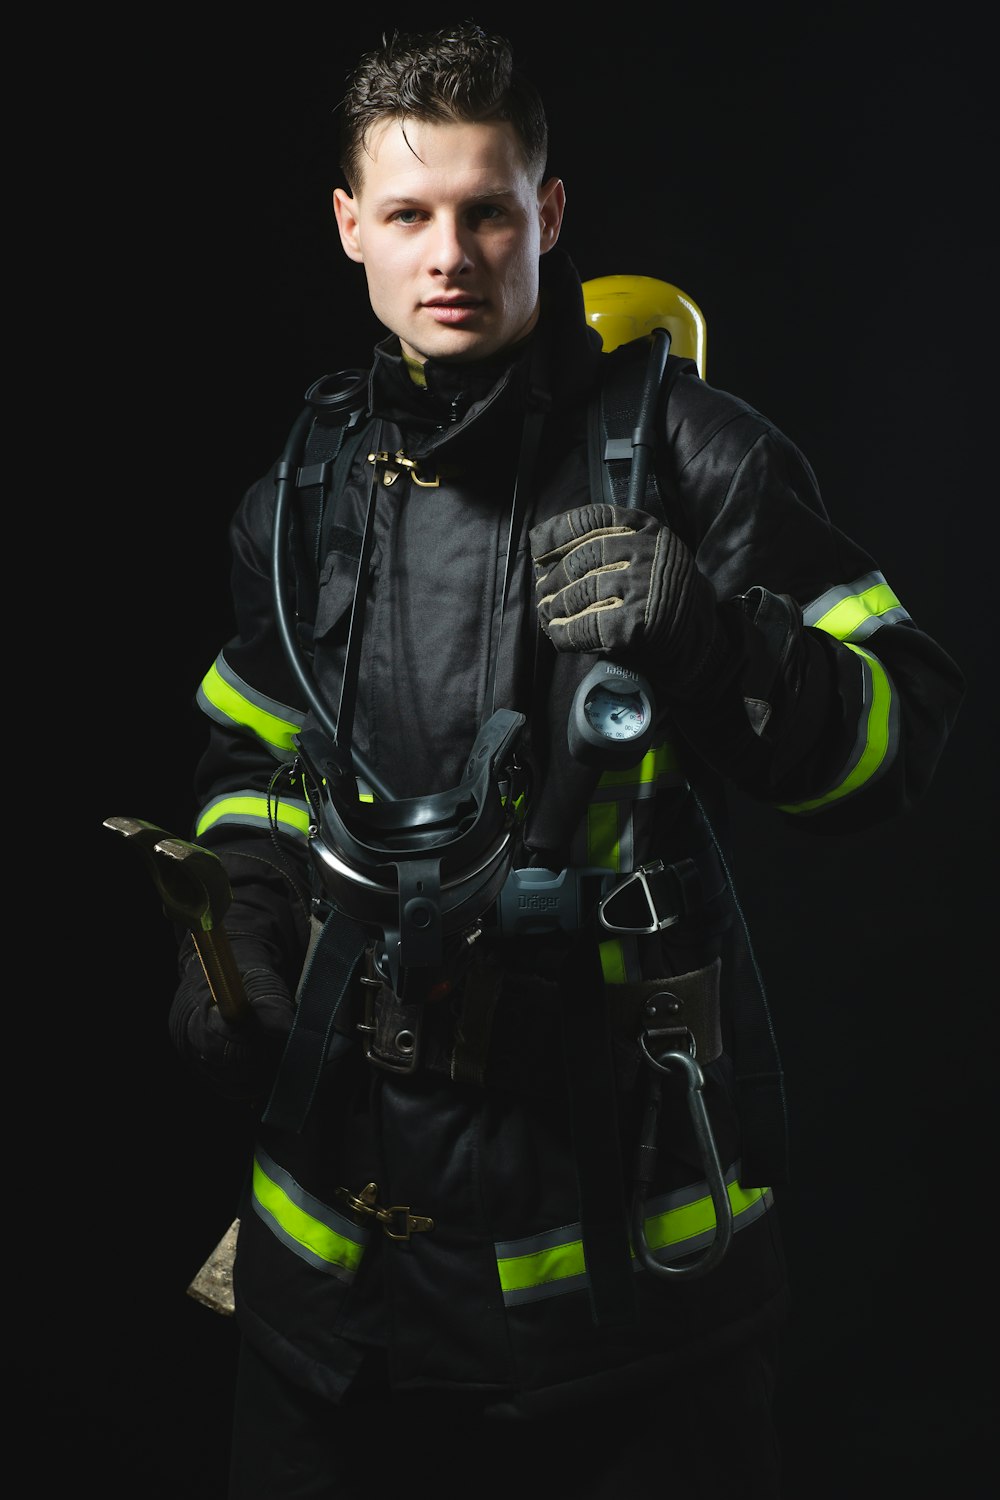 a man in a firefighter's uniform holding a tool